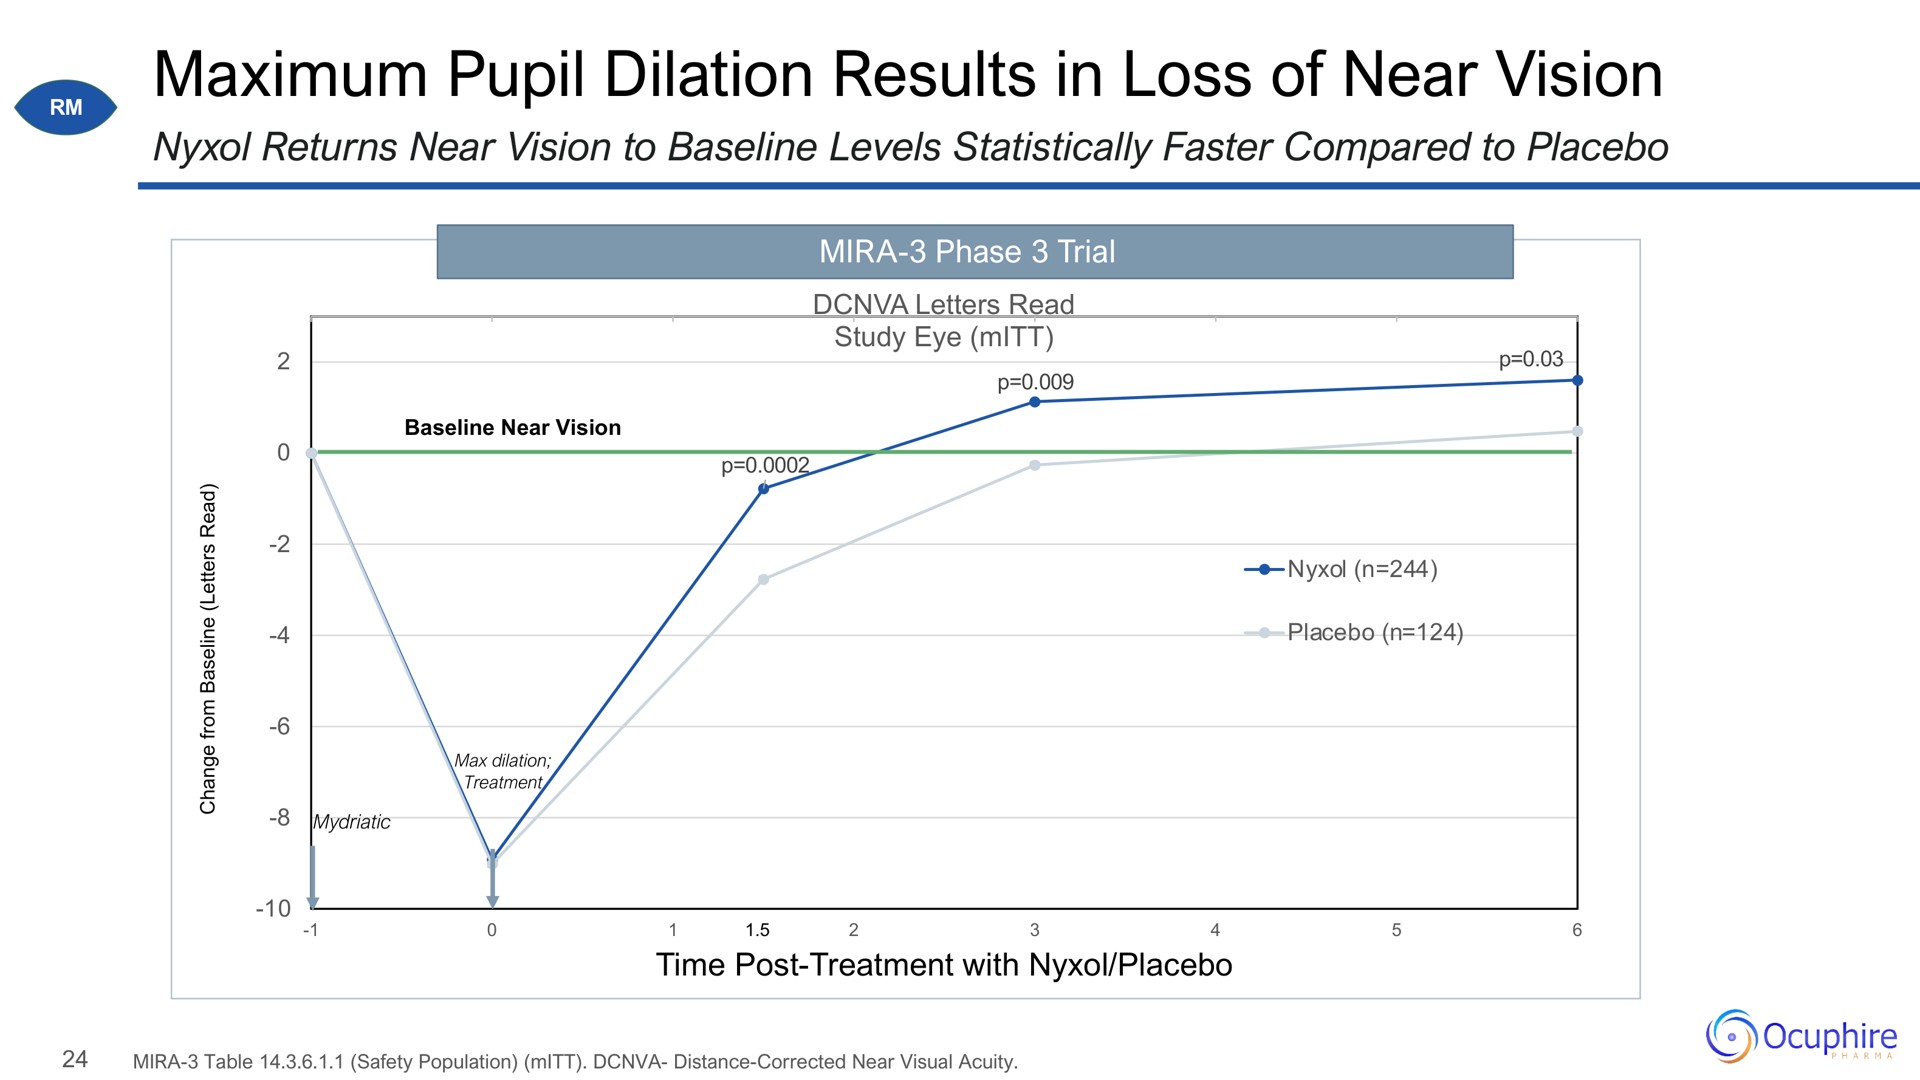 maximum pupil dilation results in loss of near vision | Ocuphire Pharma